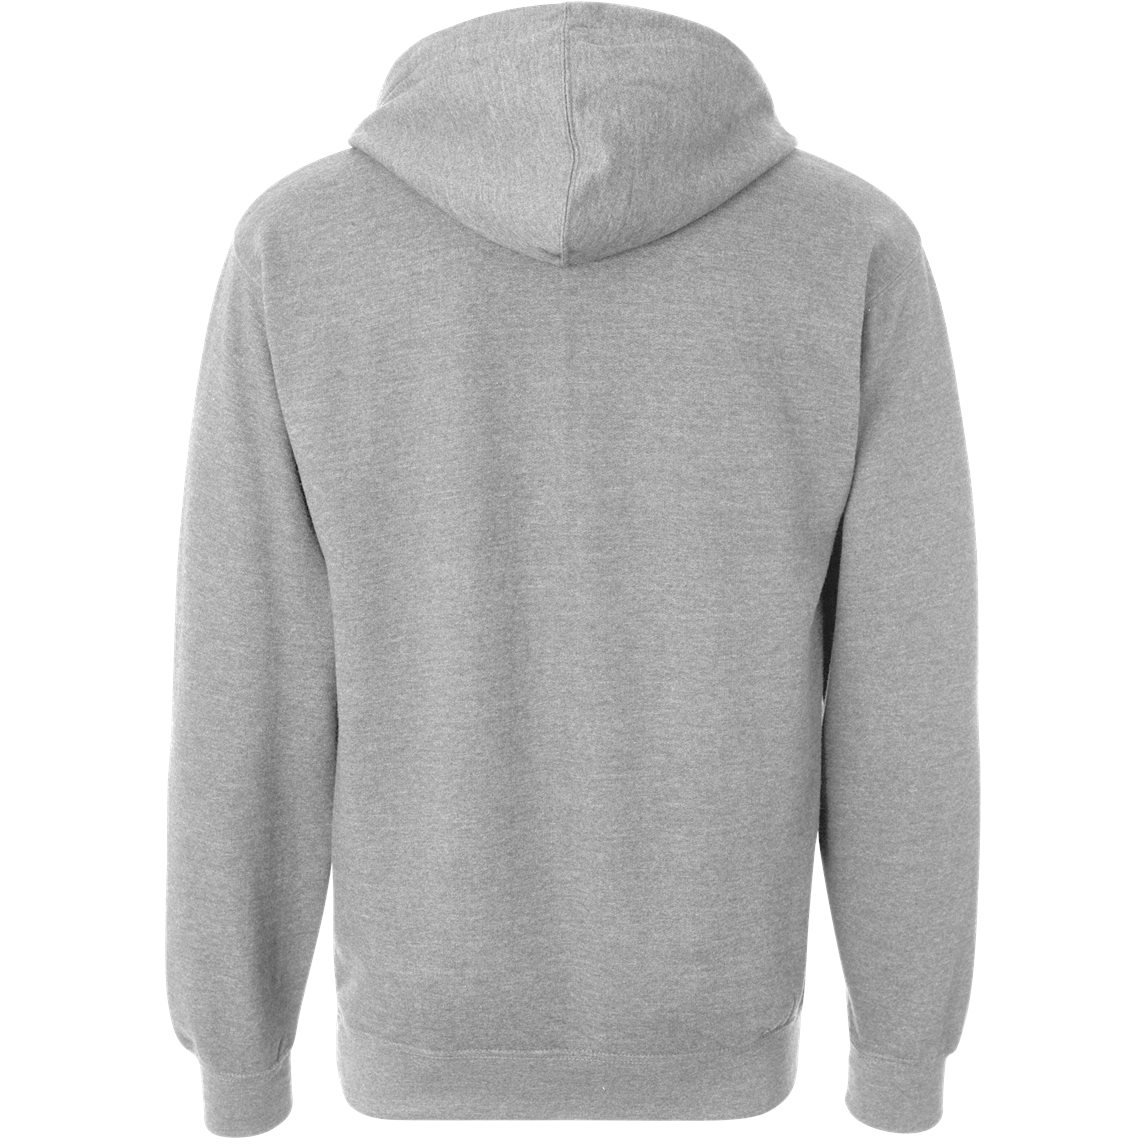 Independent Trading Co. SS4500 Midweight Hooded Sweatshirt - Grey ...